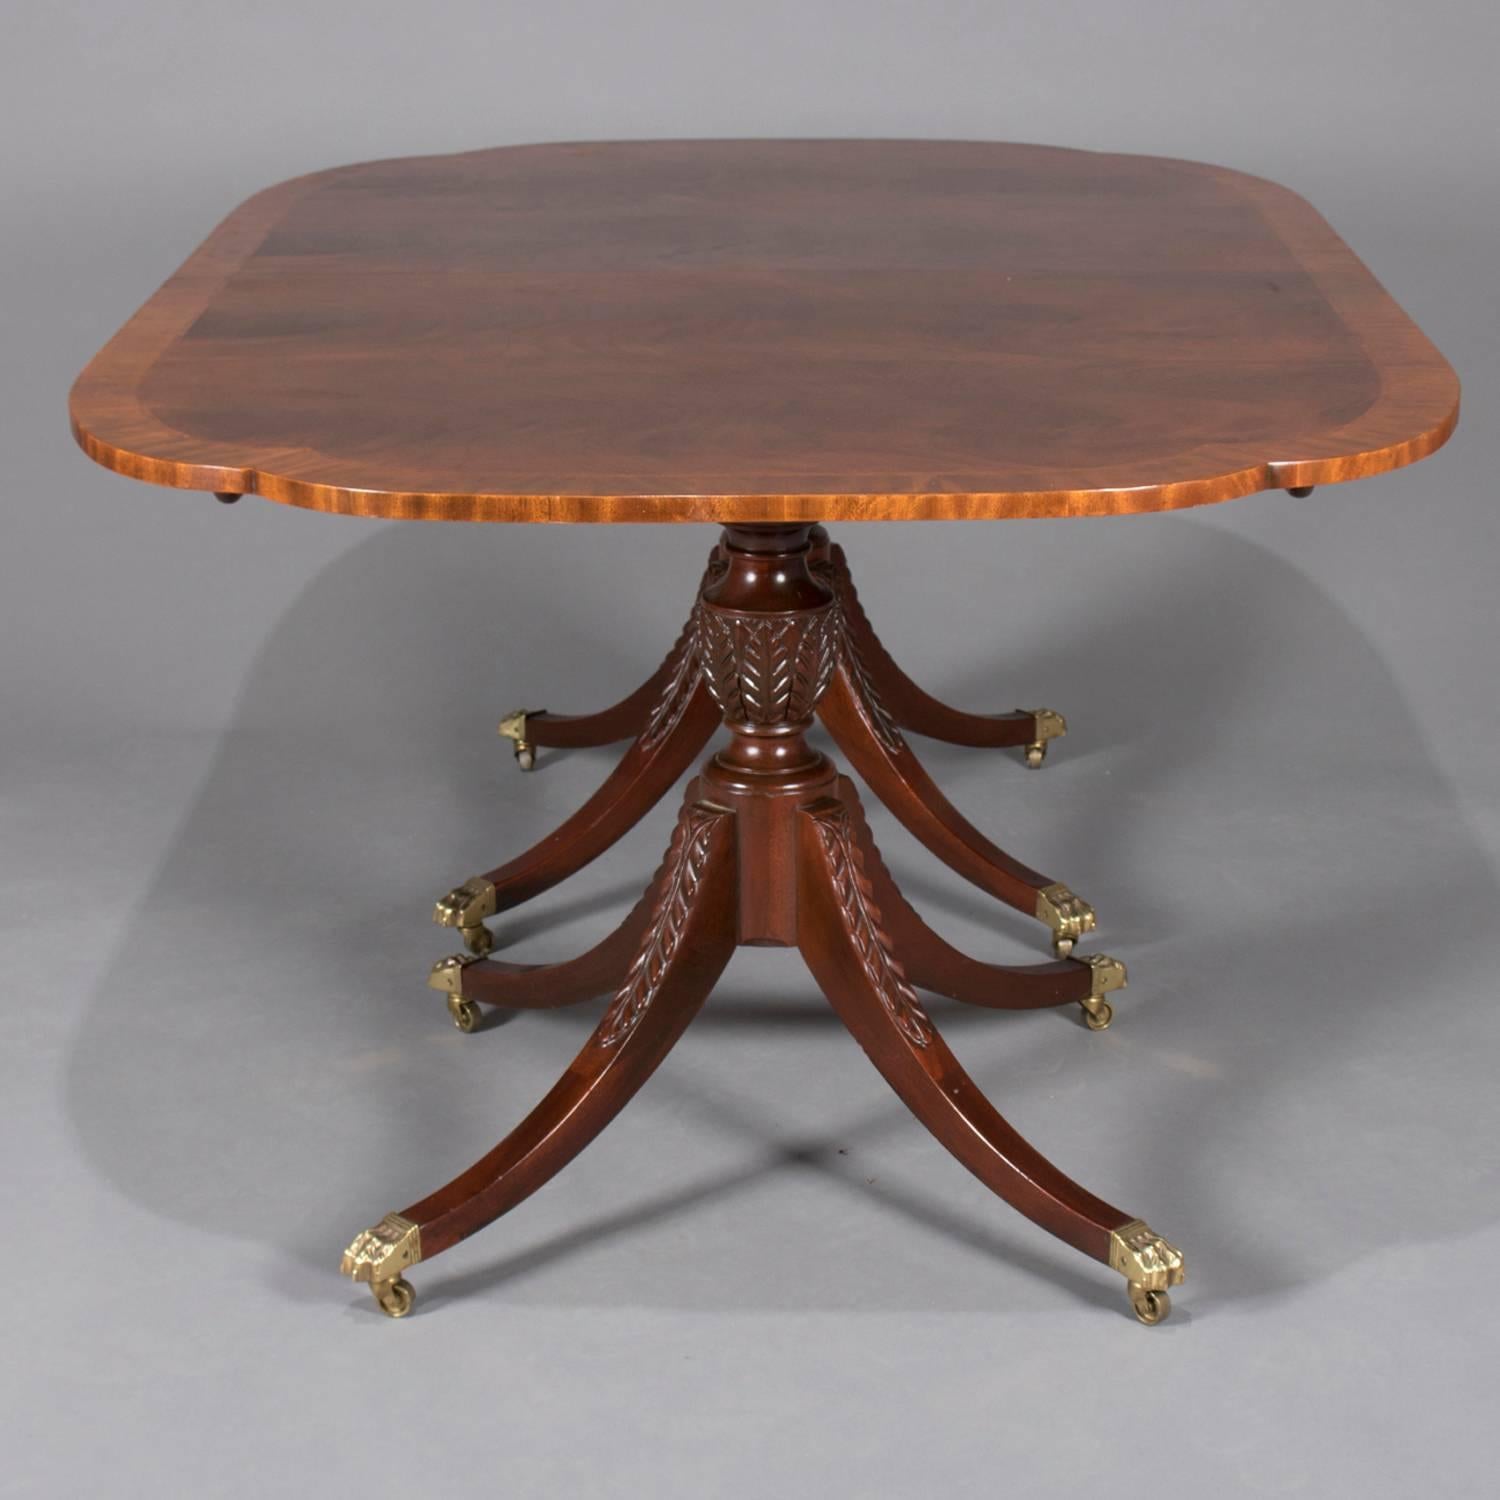 Duncan Phyfe School flame mahogany Historic Charleston reproduction double pedestal dining table features banded top raised on tow urn form pedestals with three acanthus carved legs terminating in cast bronze paw feet with casters, includes single